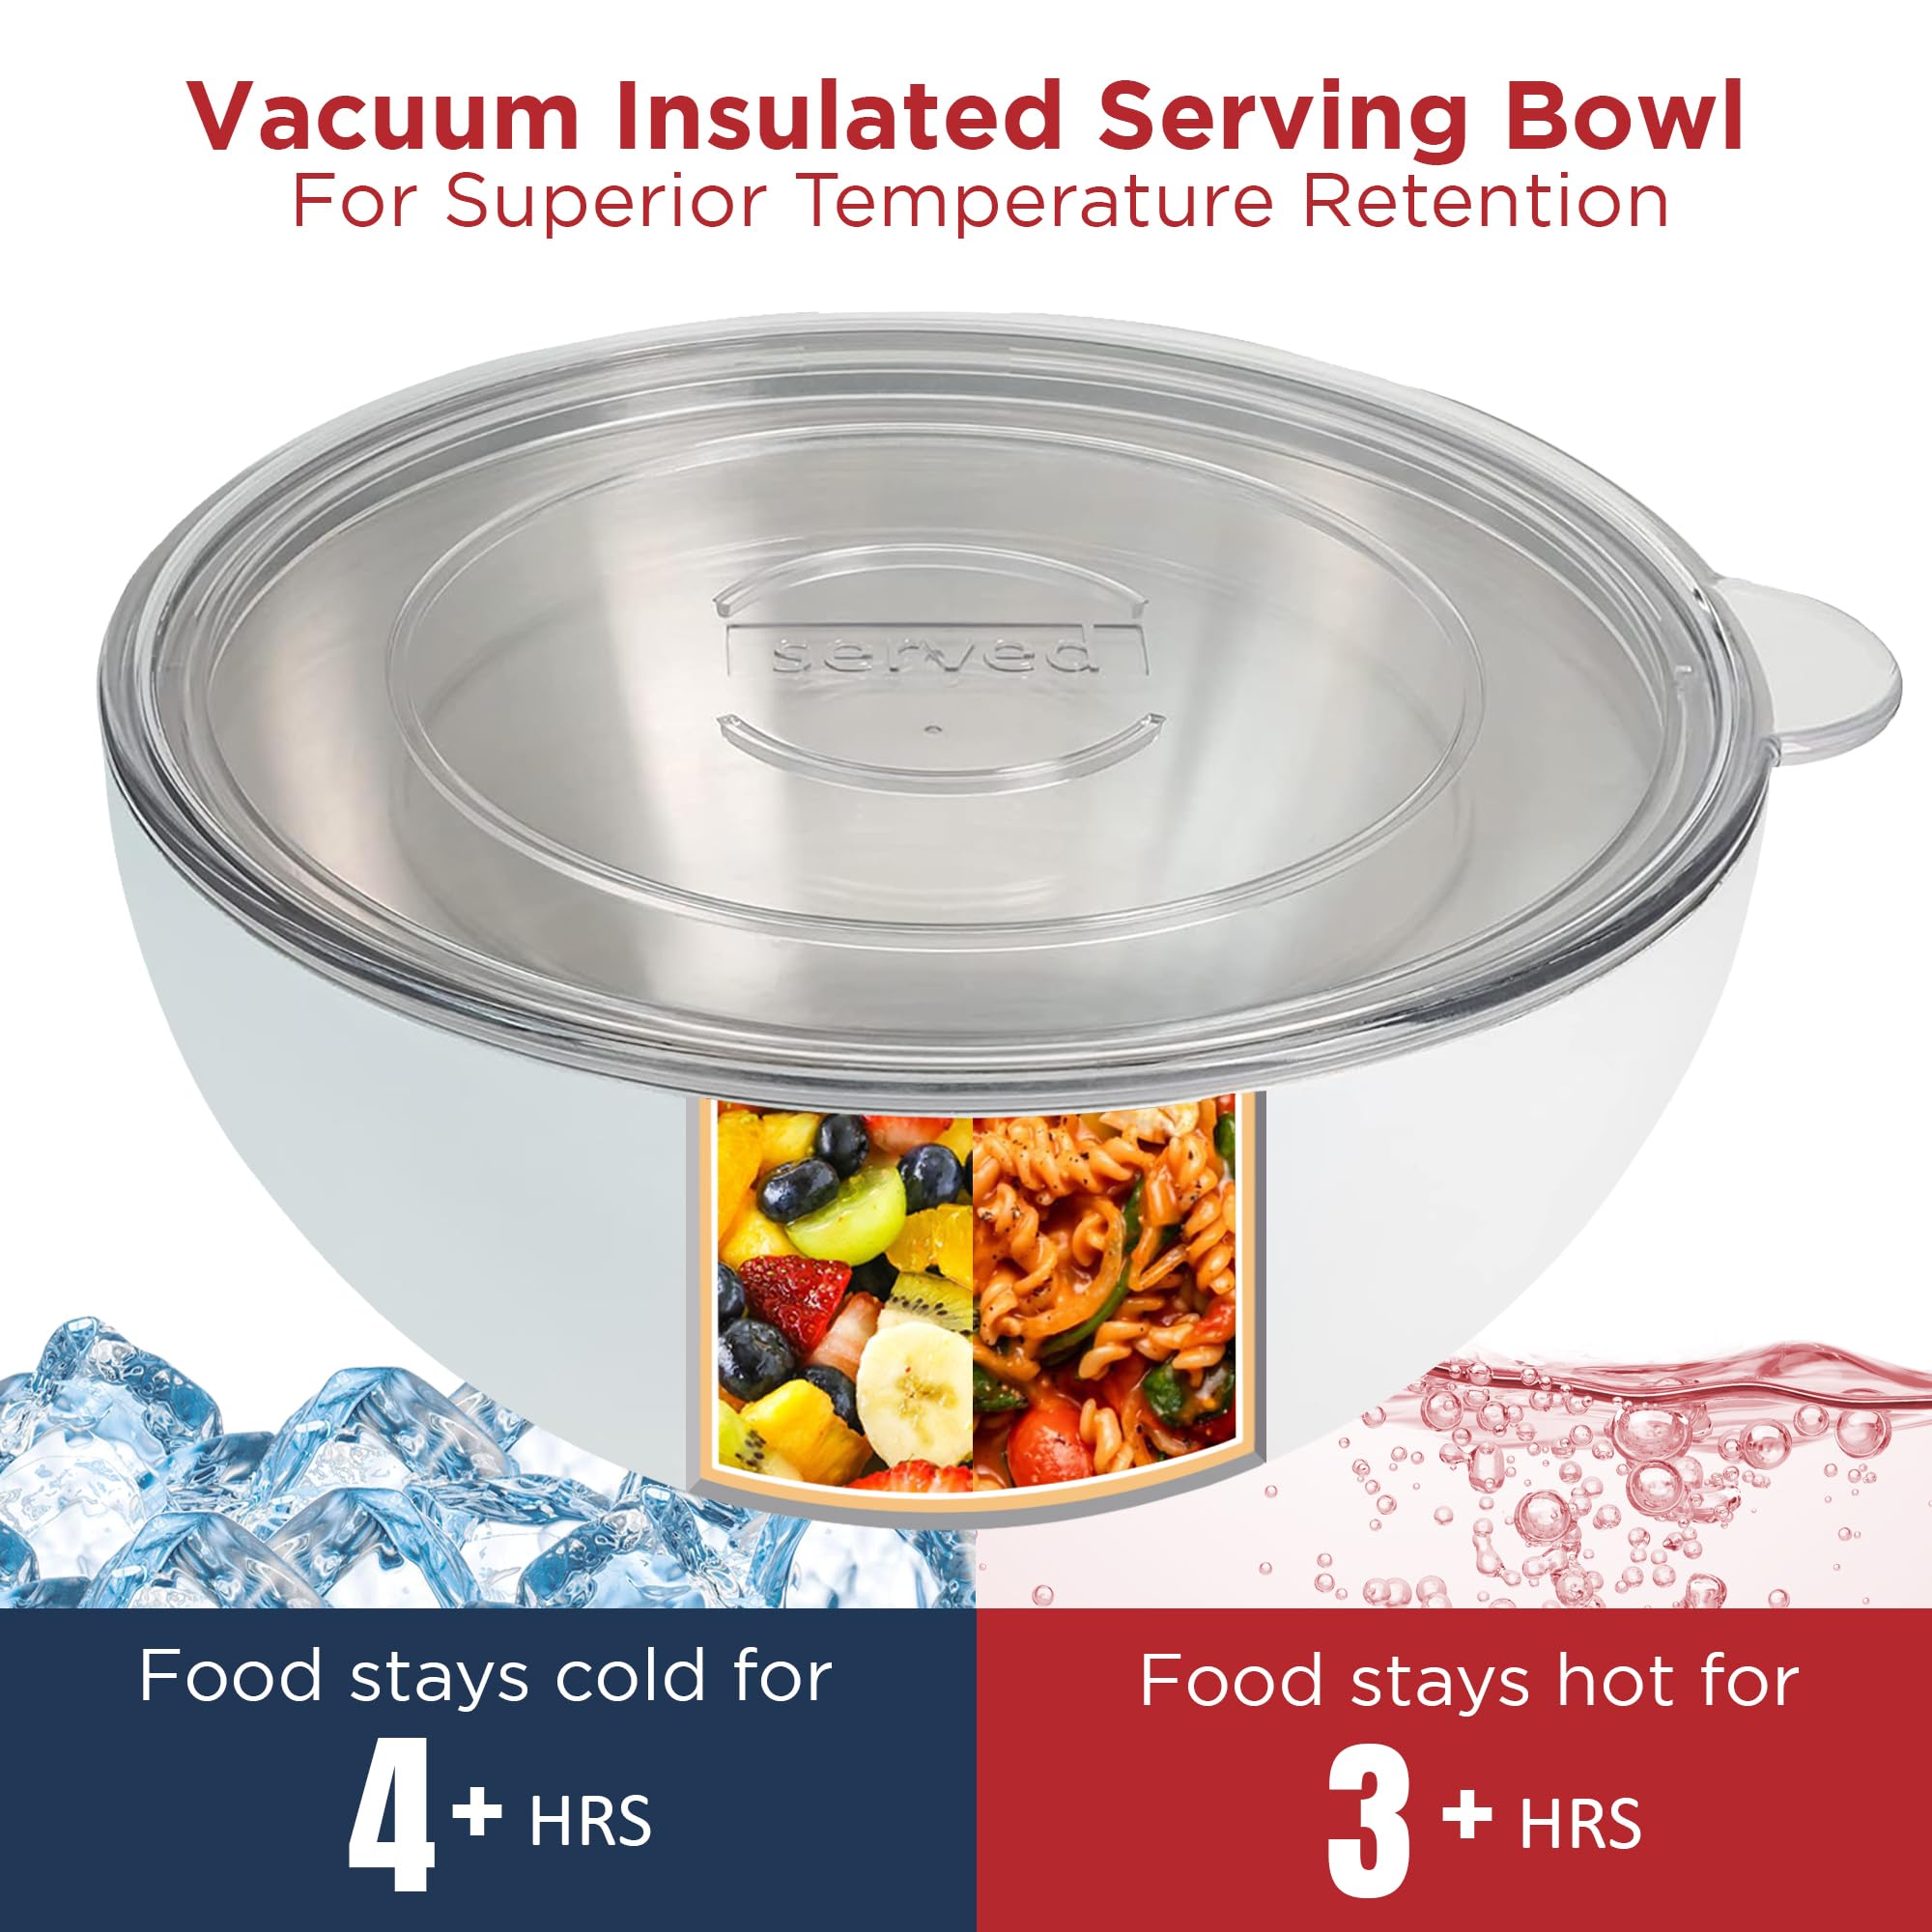 served Brand | Premium Small Serving Bowl - Keep Food Hot or Cold for Hours with our Vacuum-Insulated, Double-Walled, Copper-Lined Stainless Steel Serving Bowl (White Icing)